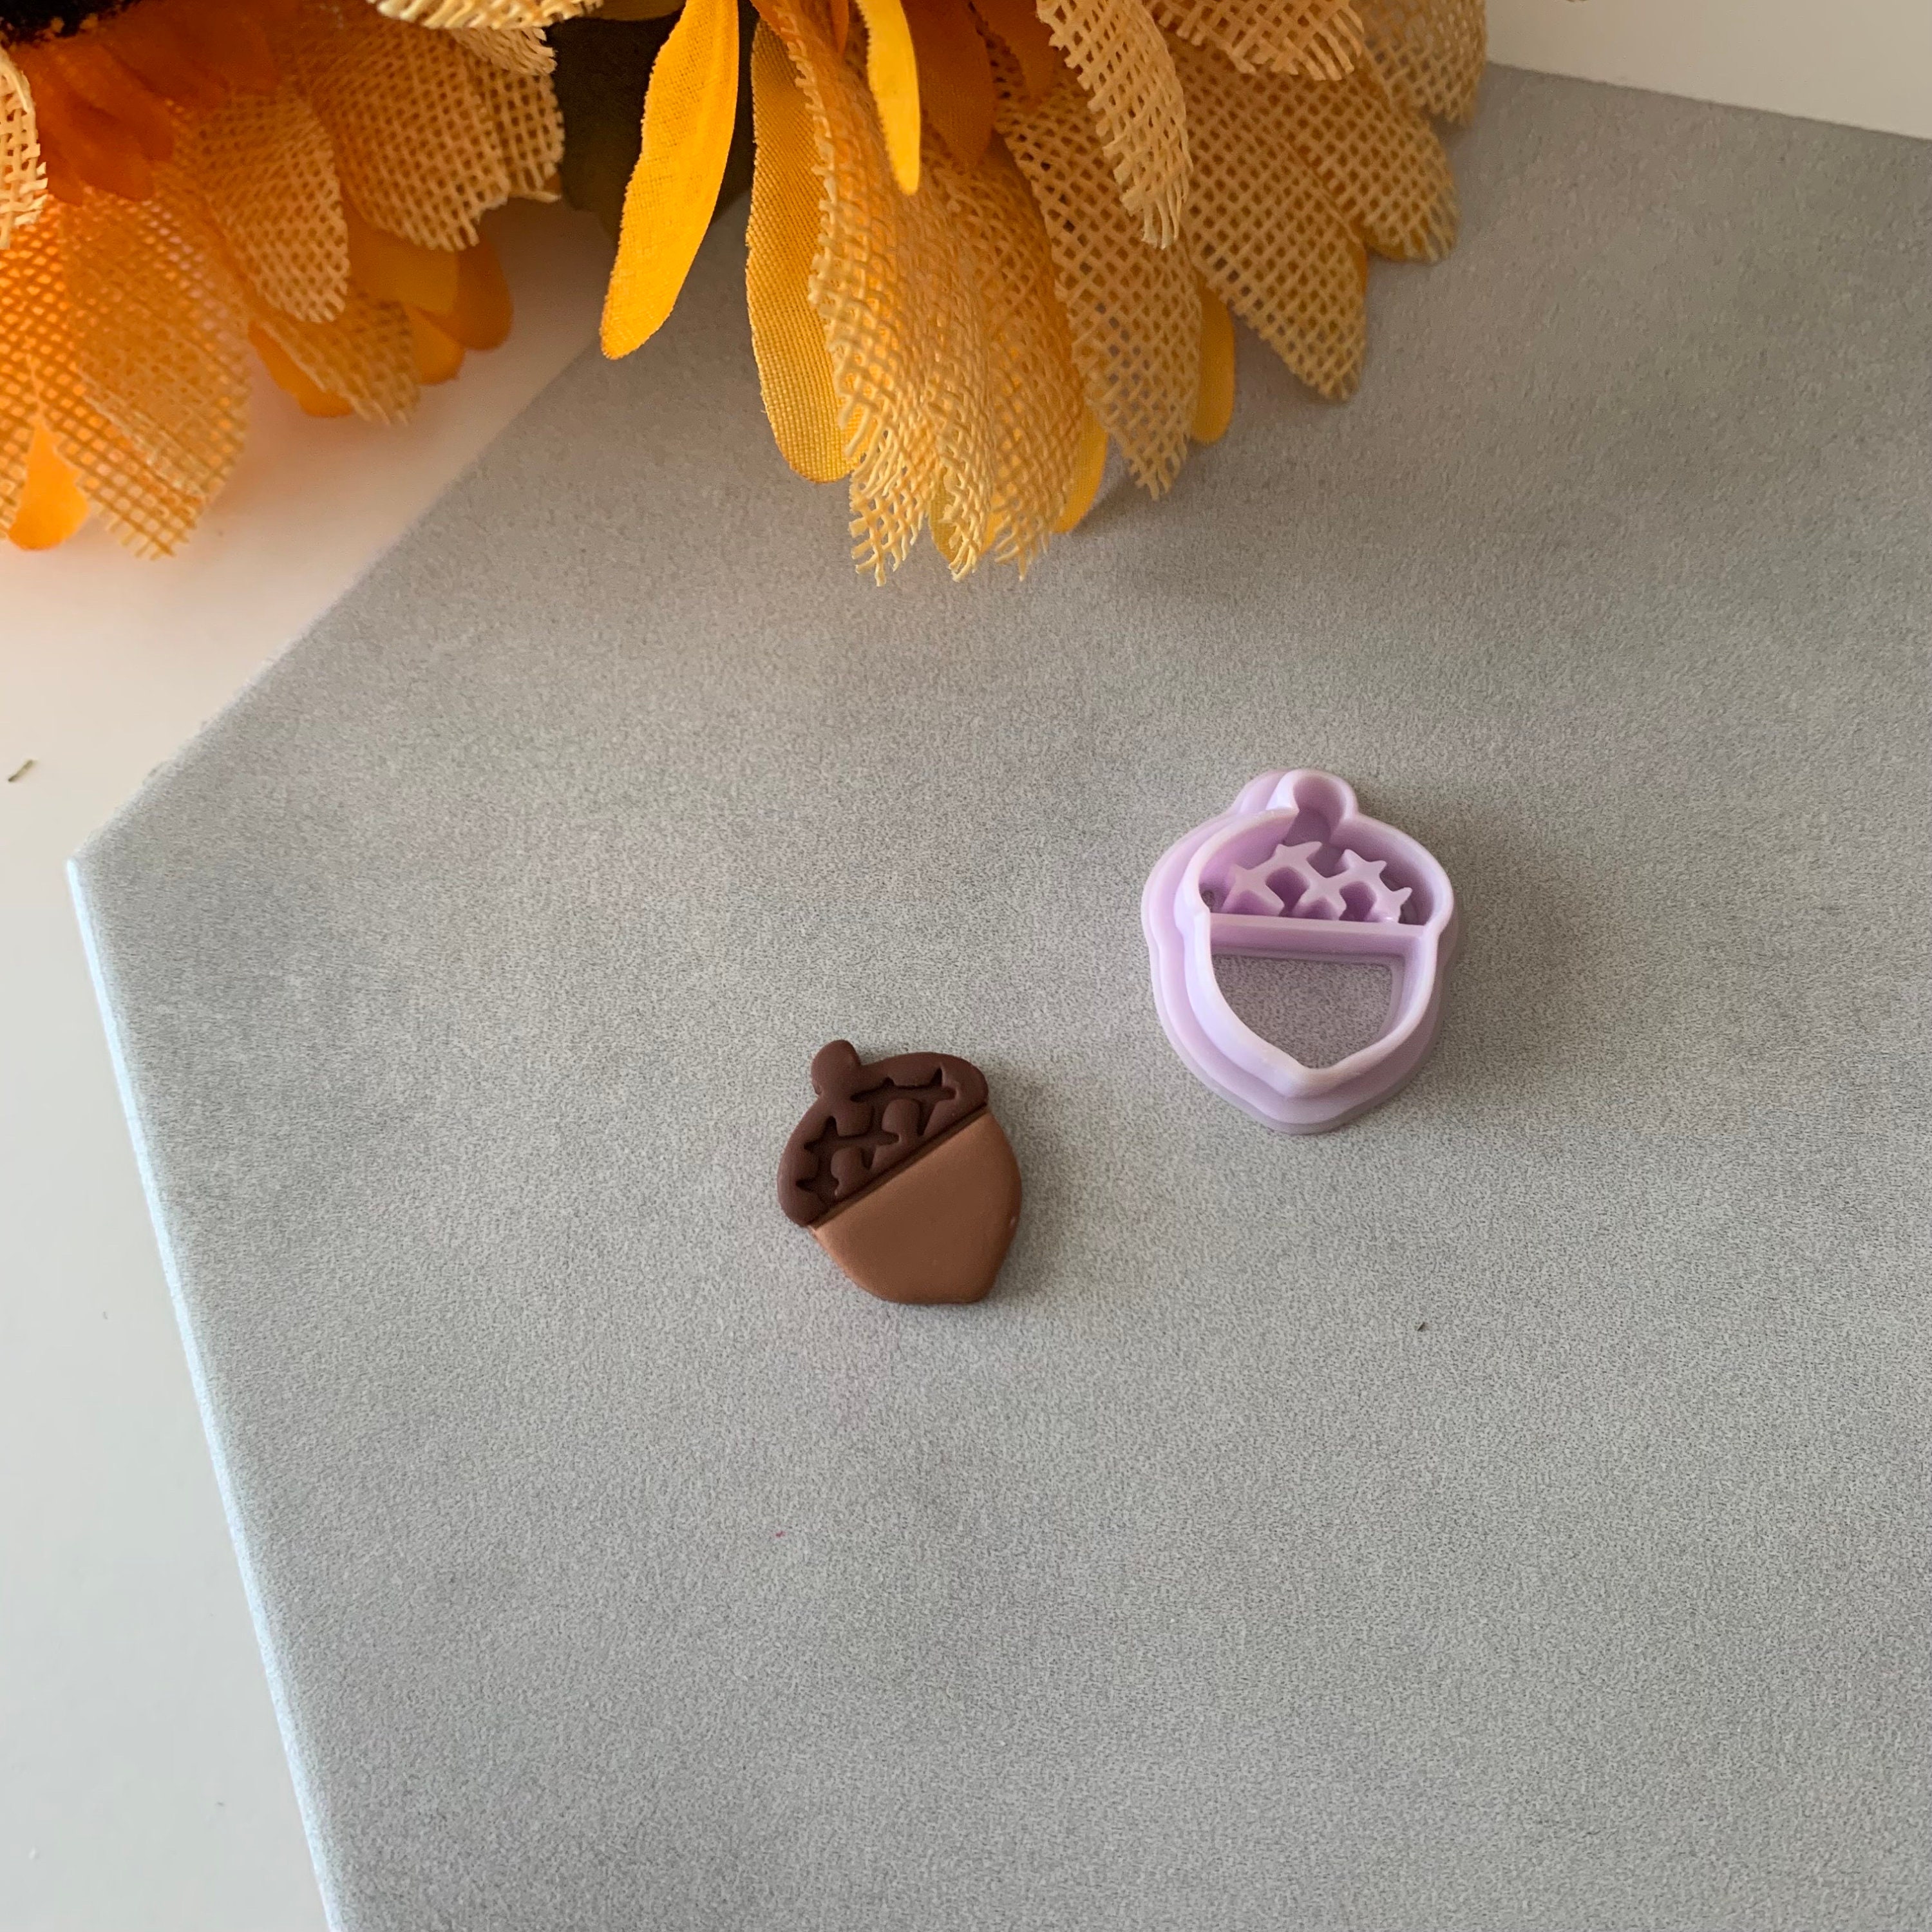  Keoker Polymer Clay Cutters for Fall - Acorn Clay